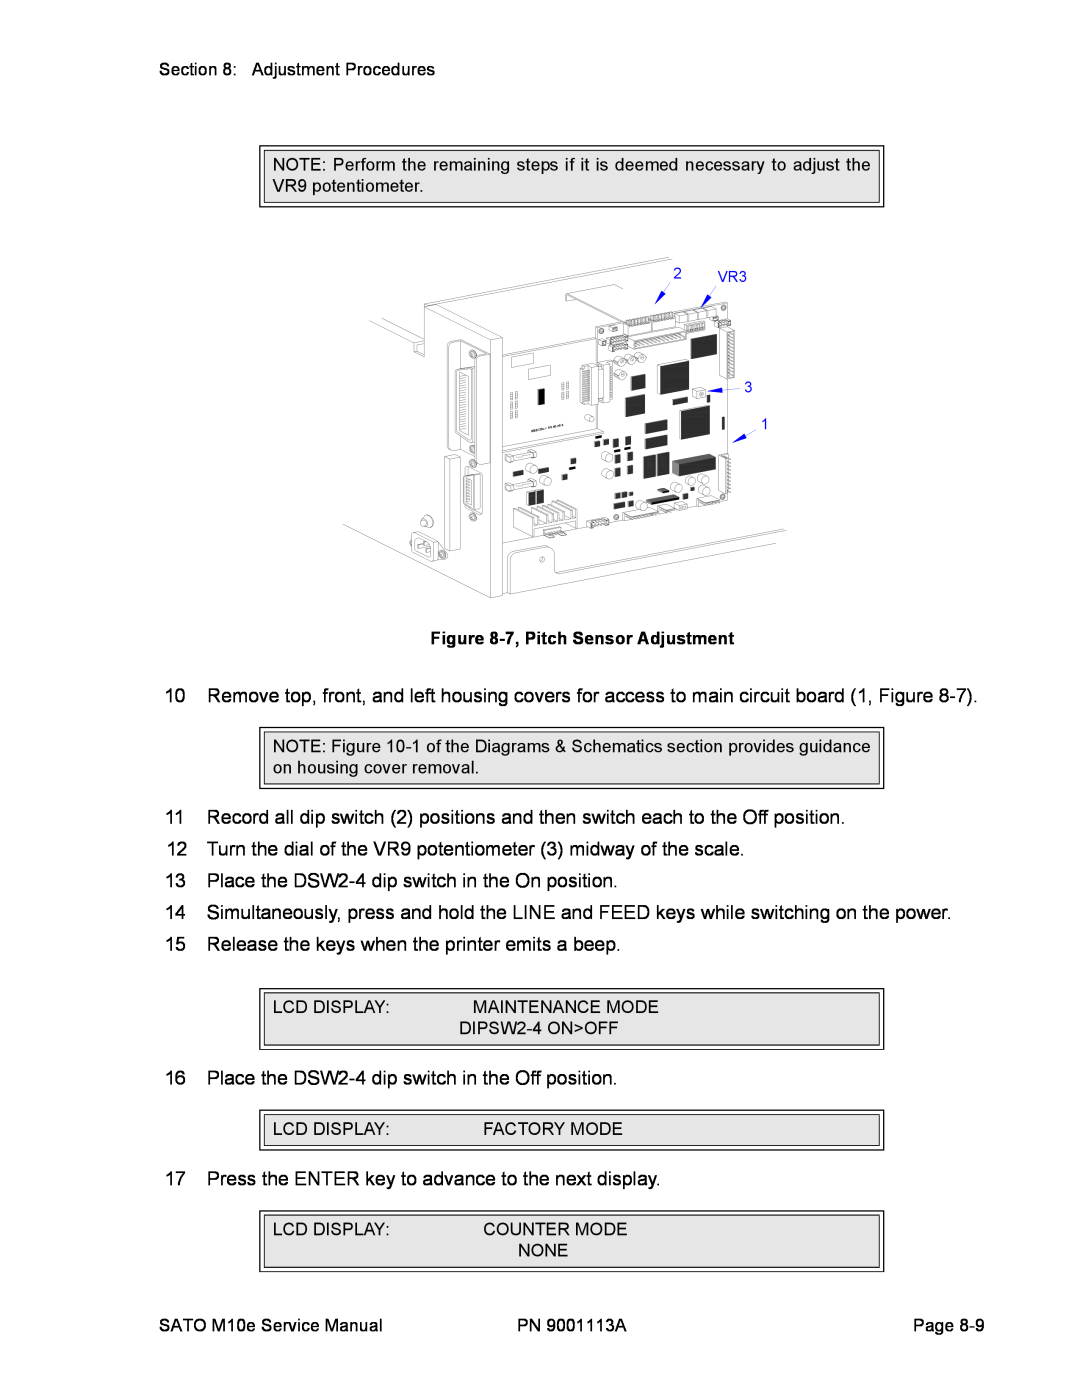 SATO 10e service manual Turn the dial of the VR9 potentiometer 3 midway of the scale 